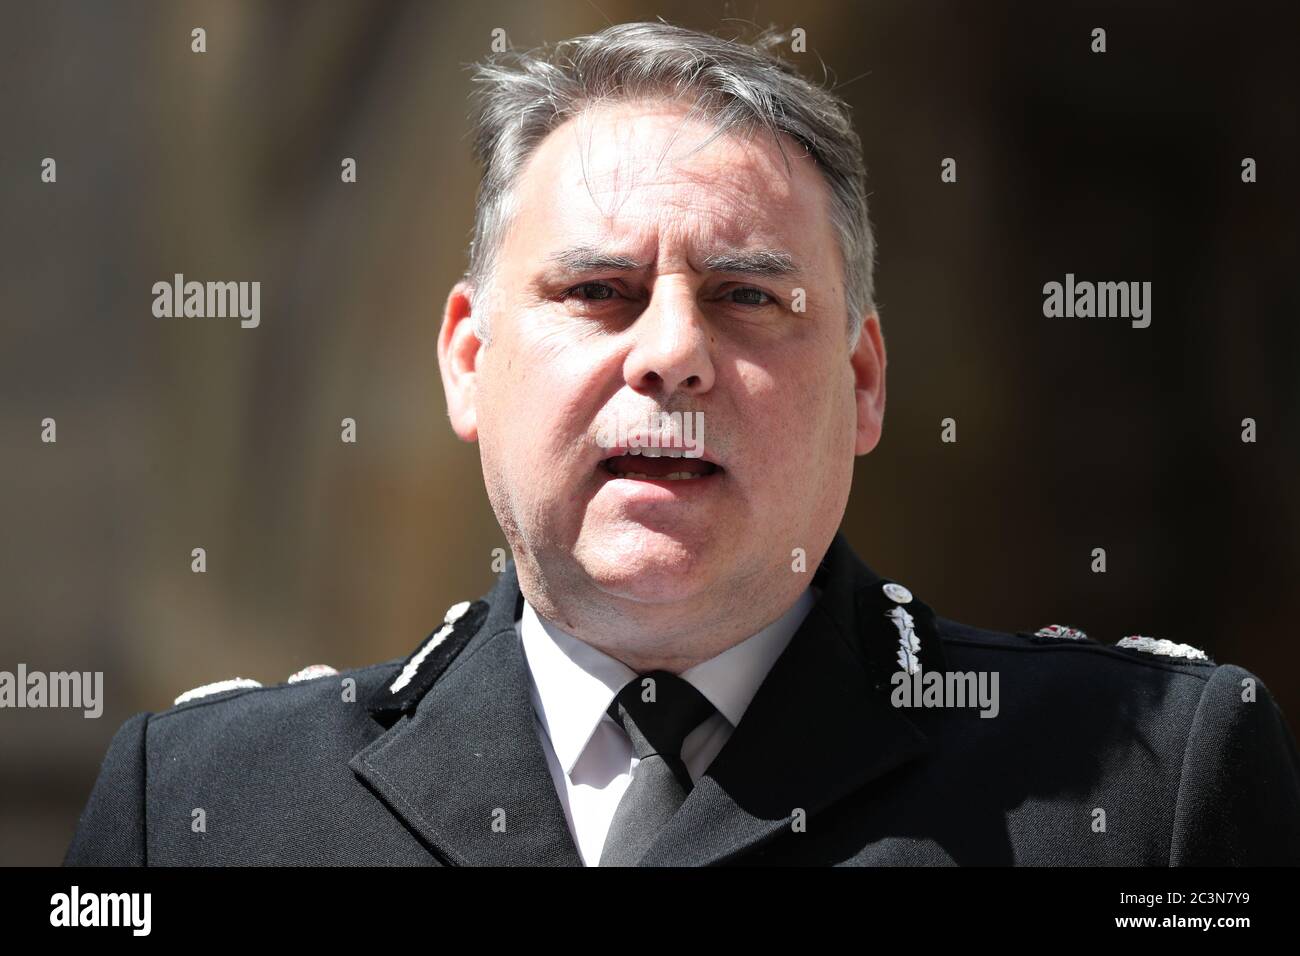 Police Chief Constable John Campbell speaks to the media at the entrance at Forbury Gardens in Reading town centre, the scene of a multiple stabbing attack which took place at around 7pm on Saturday leaving three people dead and another three seriously injured. Stock Photo